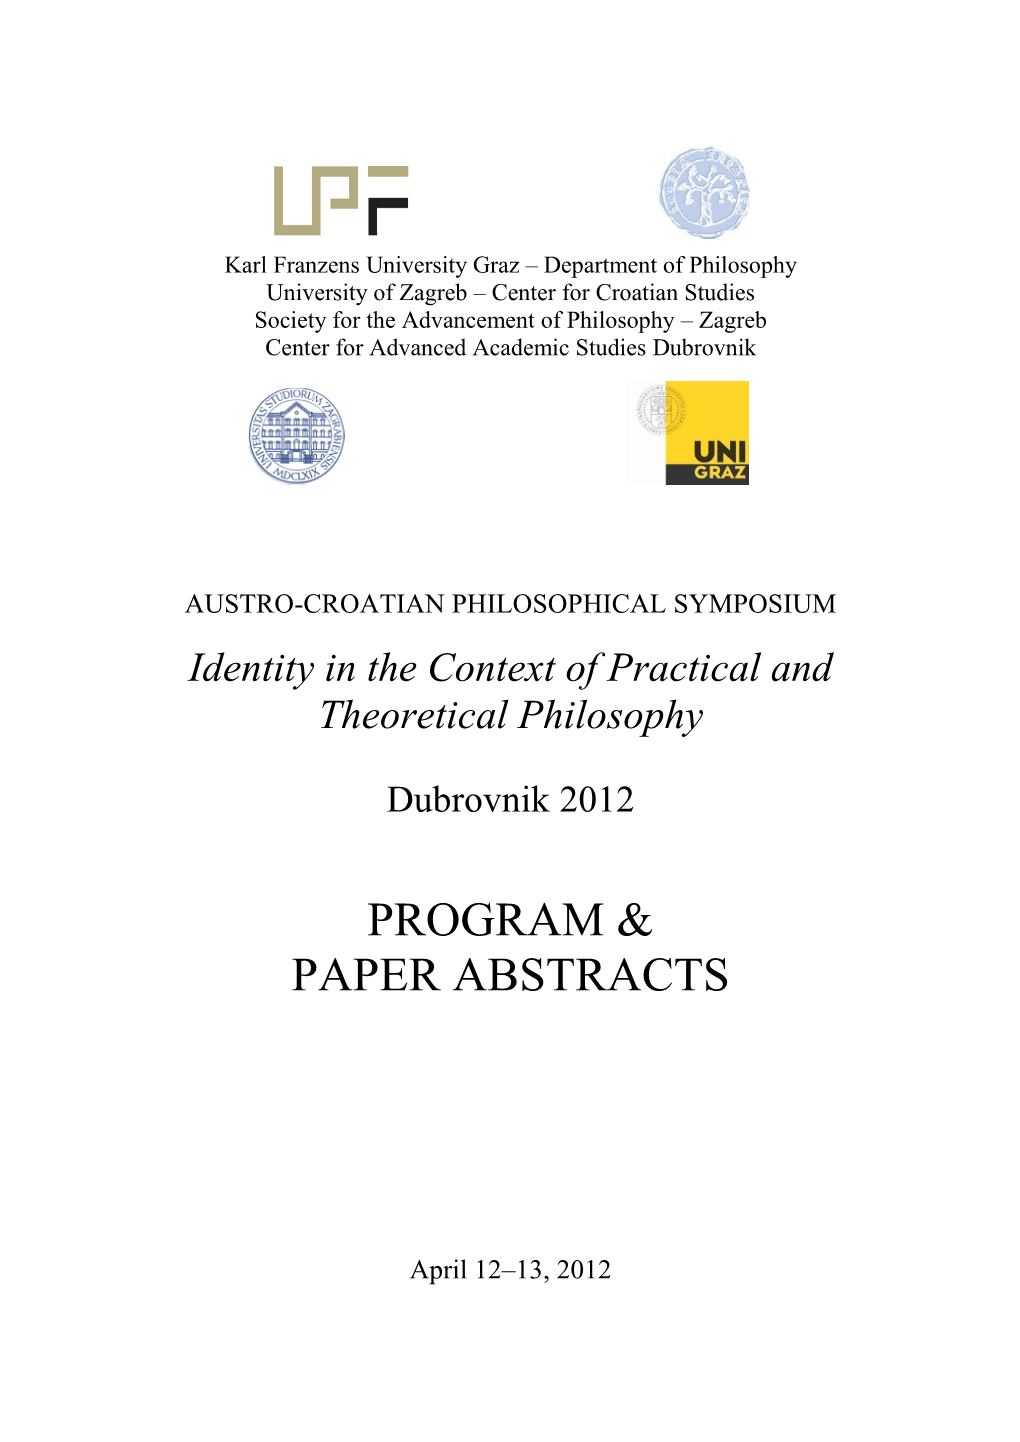 Program & Paper Abstracts